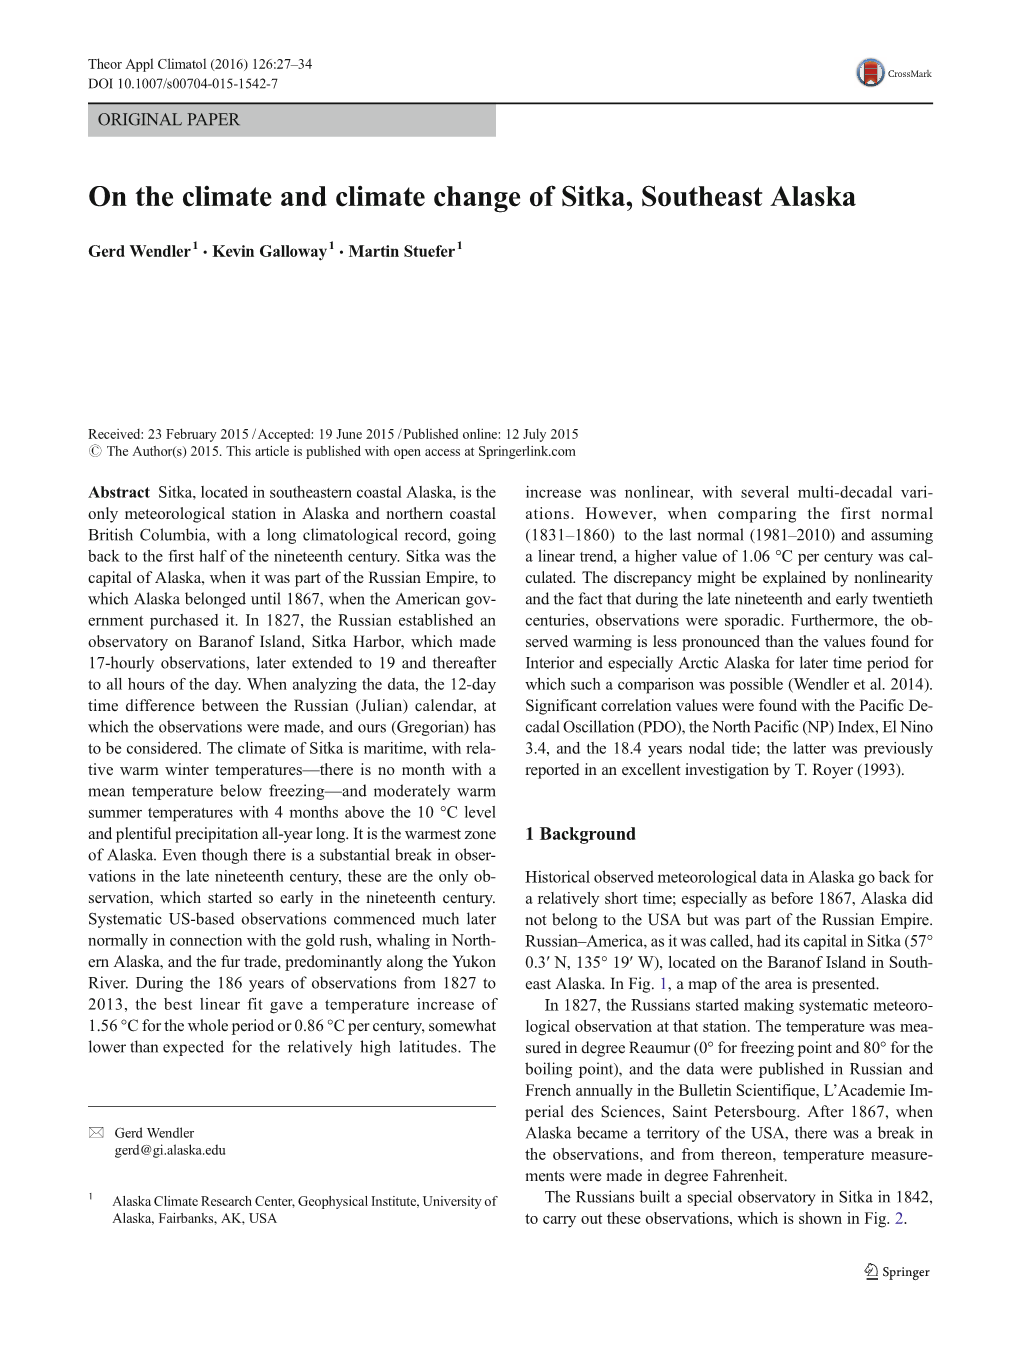 On the Climate and Climate Change of Sitka, Southeast Alaska